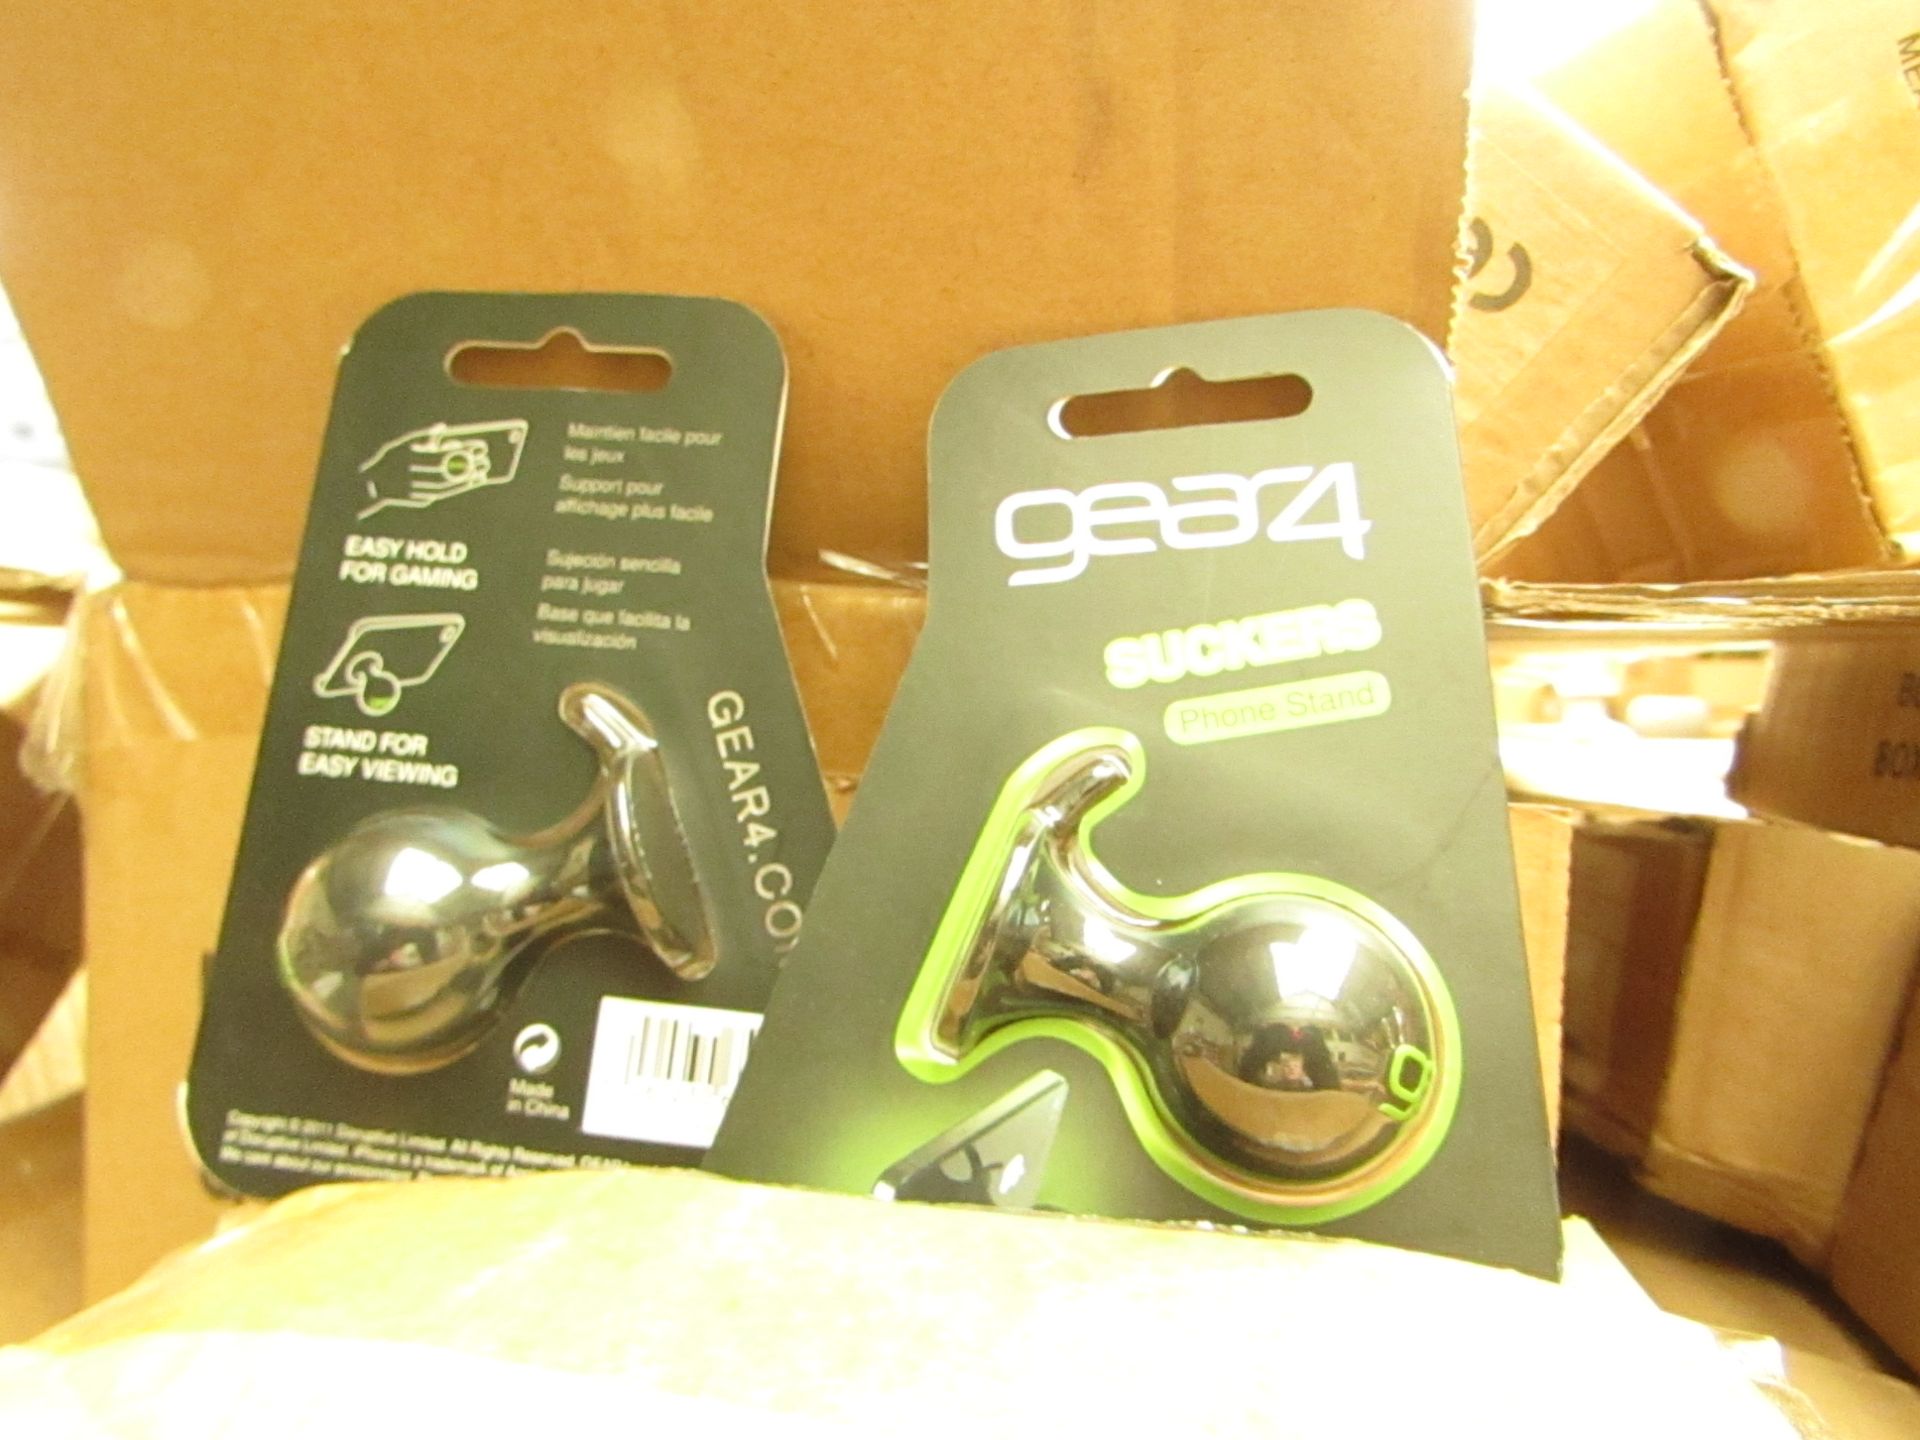 10x Gear 4 phone stands, new and boxed.